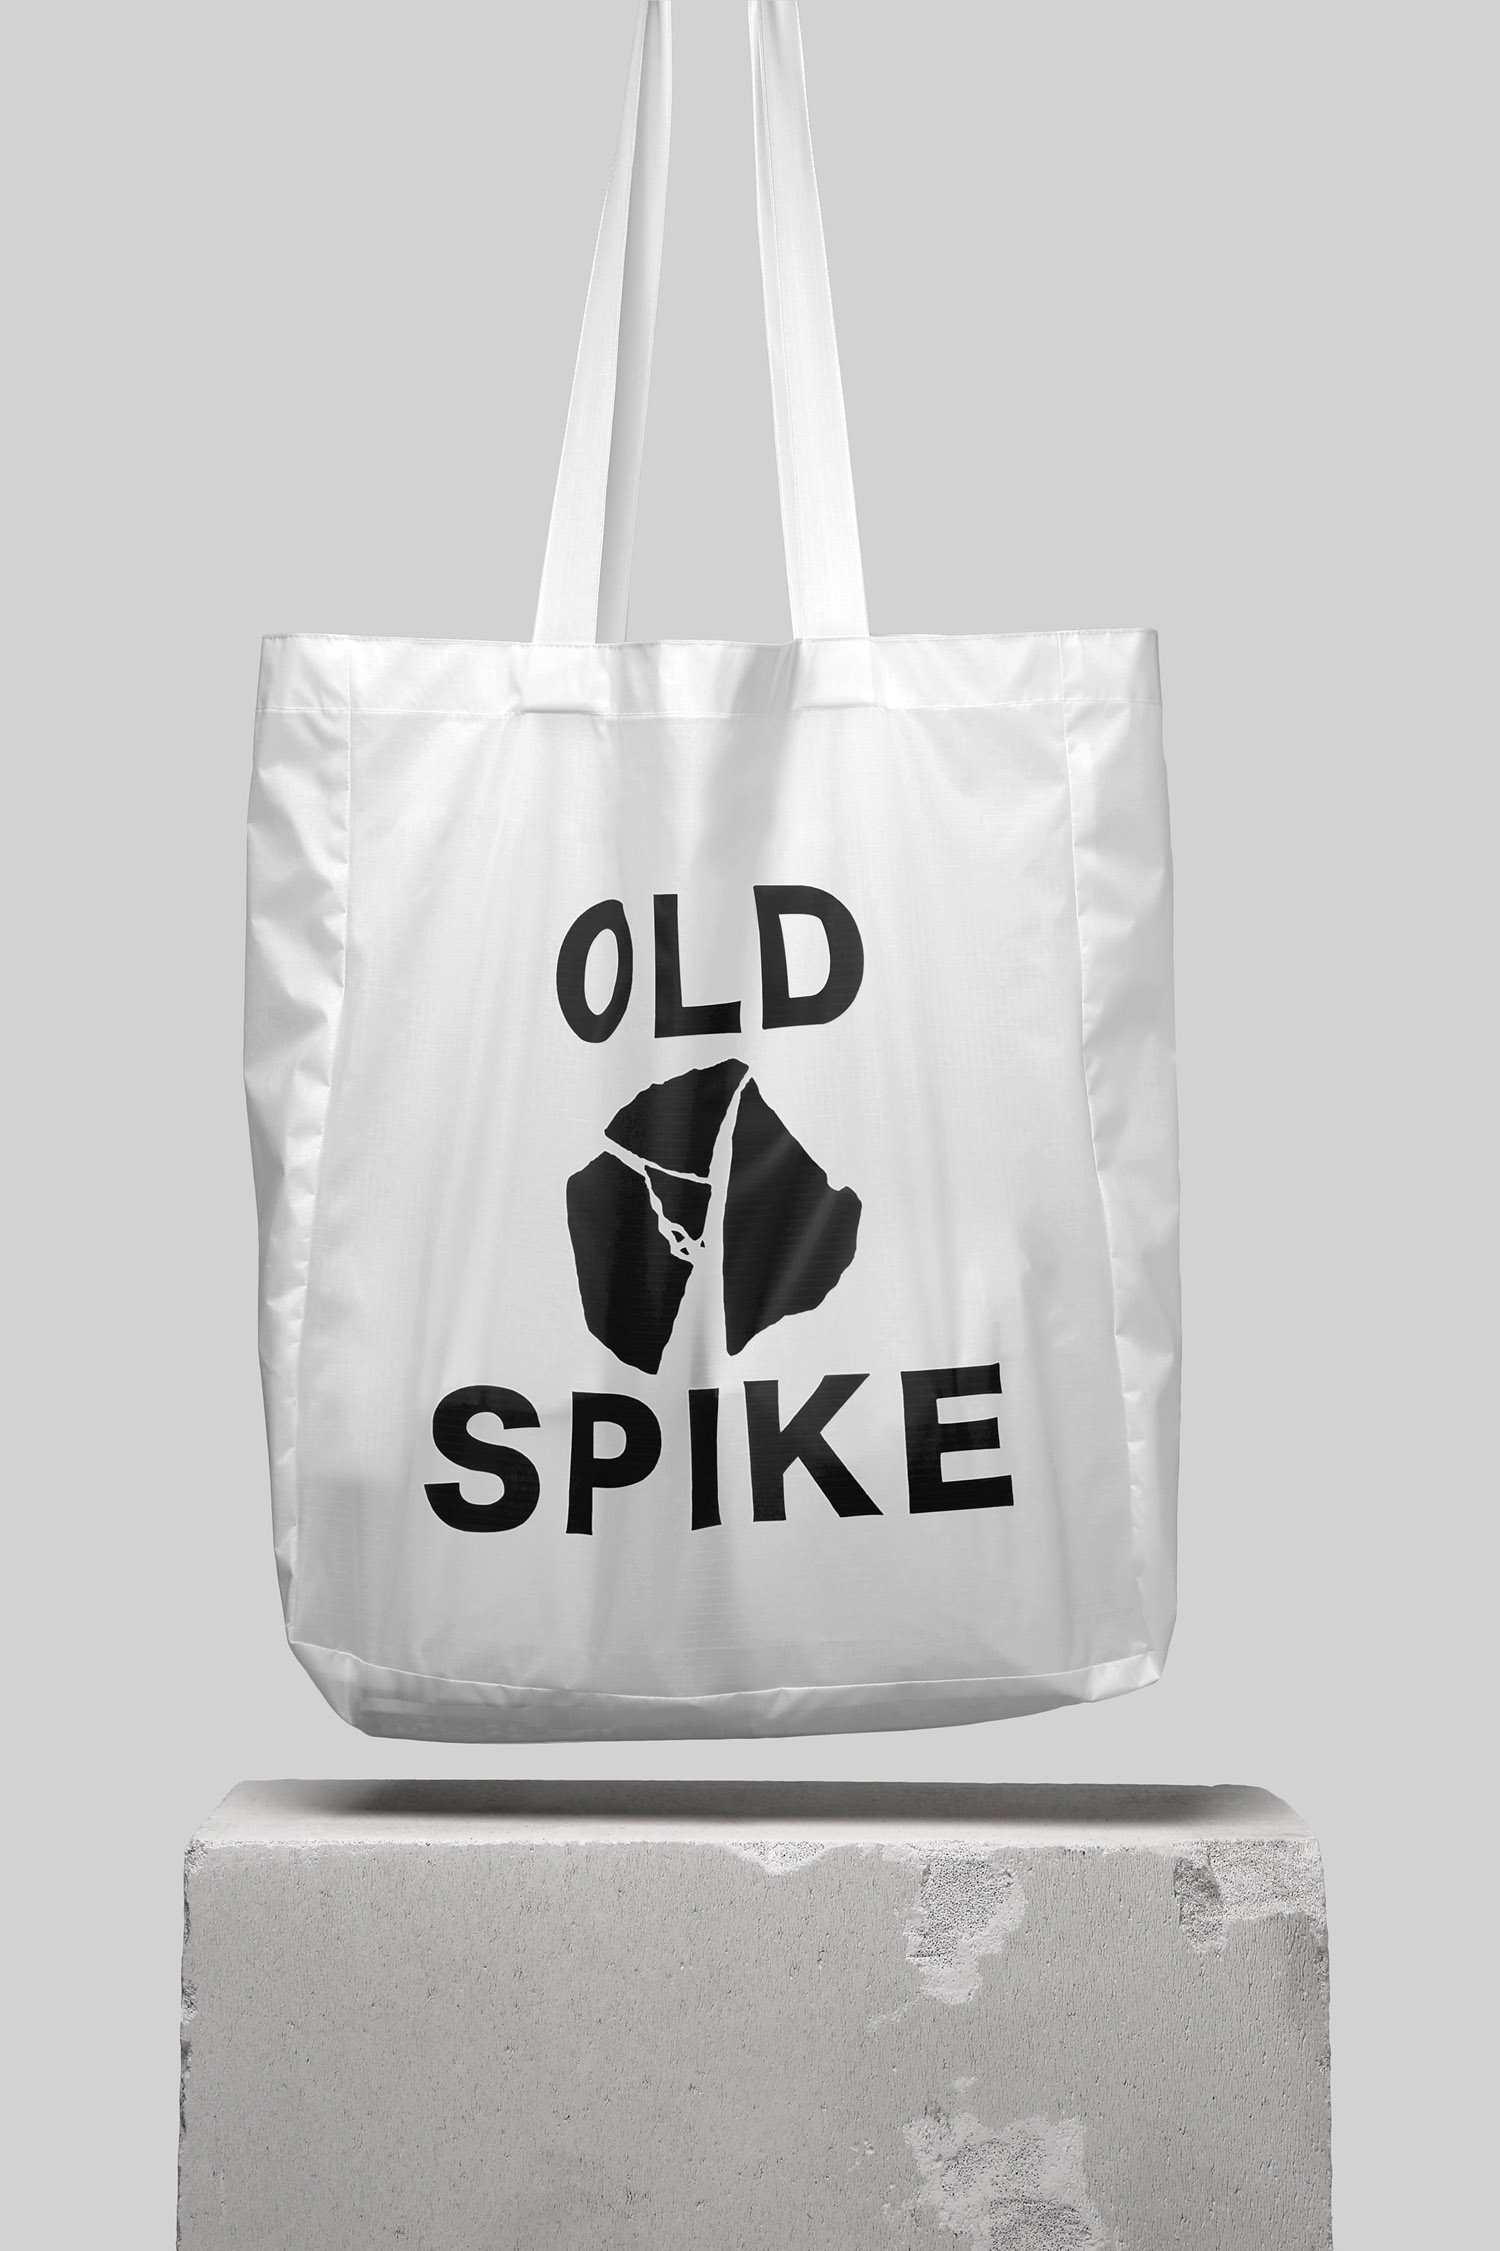 Tote Bag Design – Old Spike by Commission